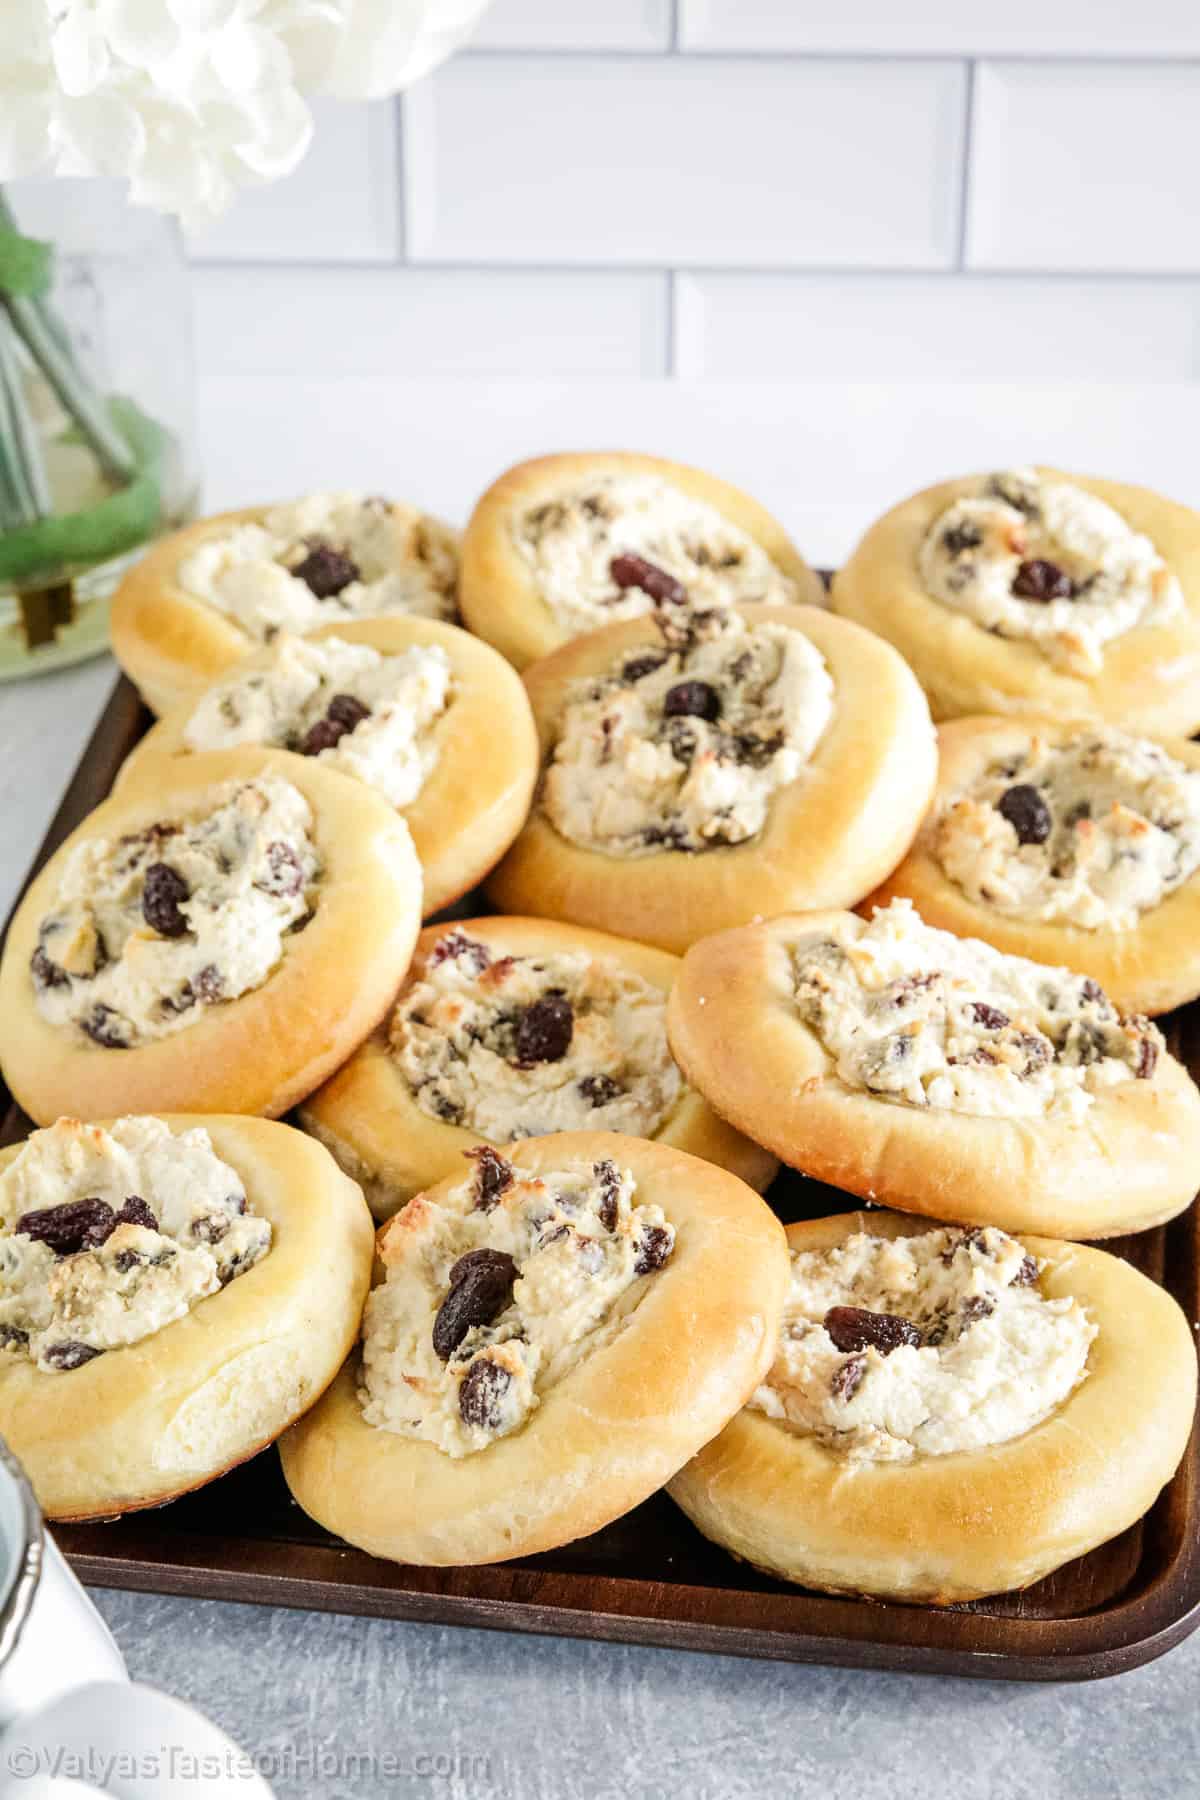 These delicious Sweet Buns feature sweet, light, fluffy buns that are filled with a creamy filling made of farmer's cheese, cream cheese, and the sweetness of raisins. 